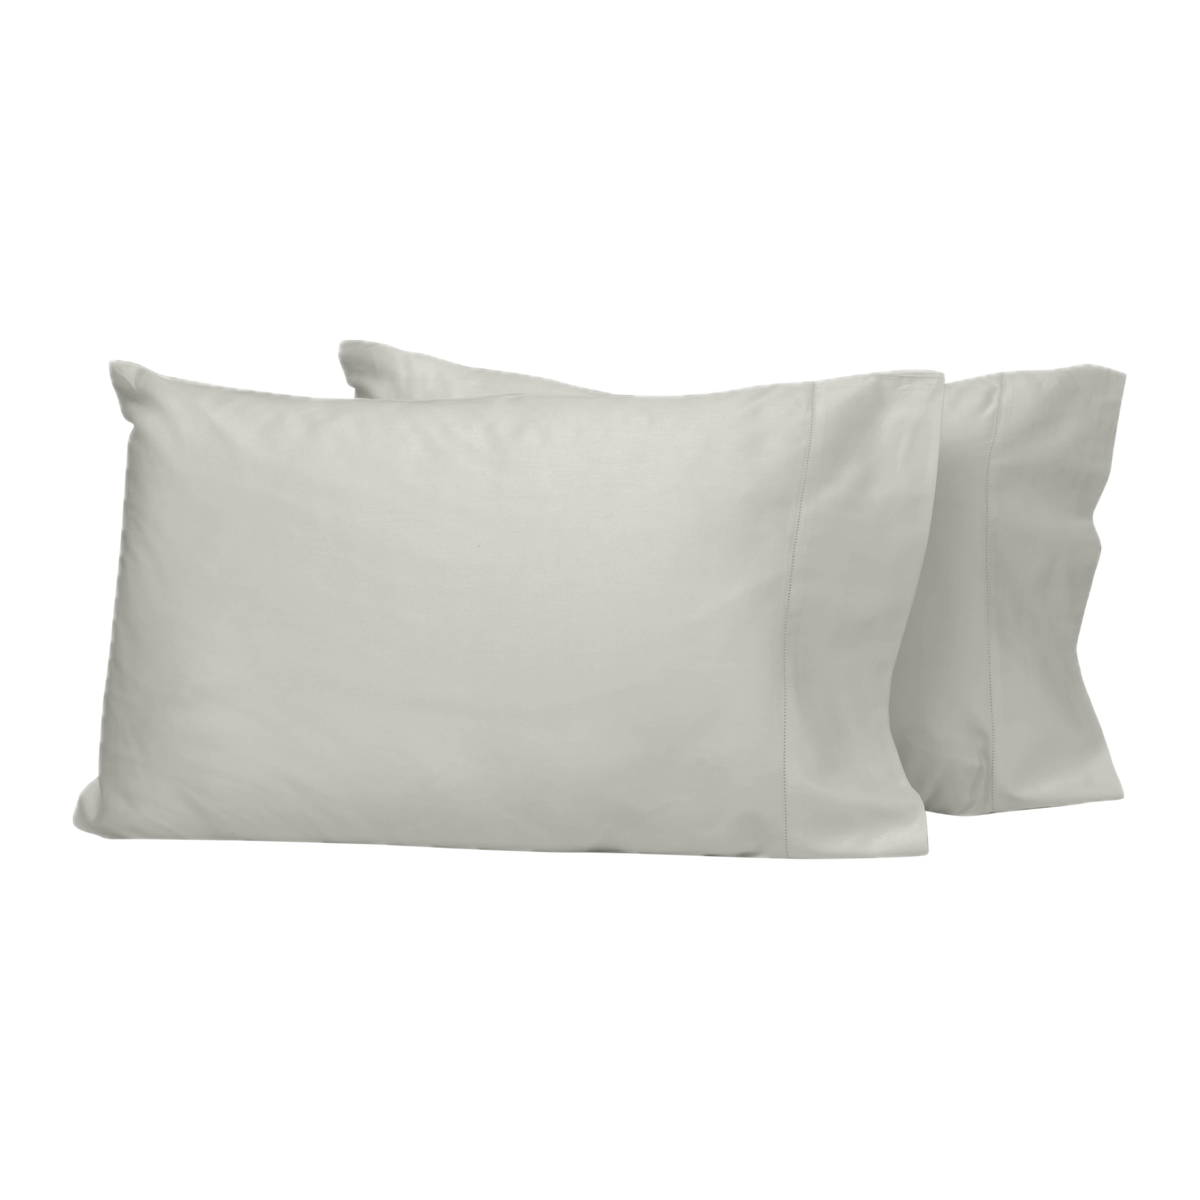 Pair of Pillowcases of Pearl  Signoria Nuvola Percale Bedding